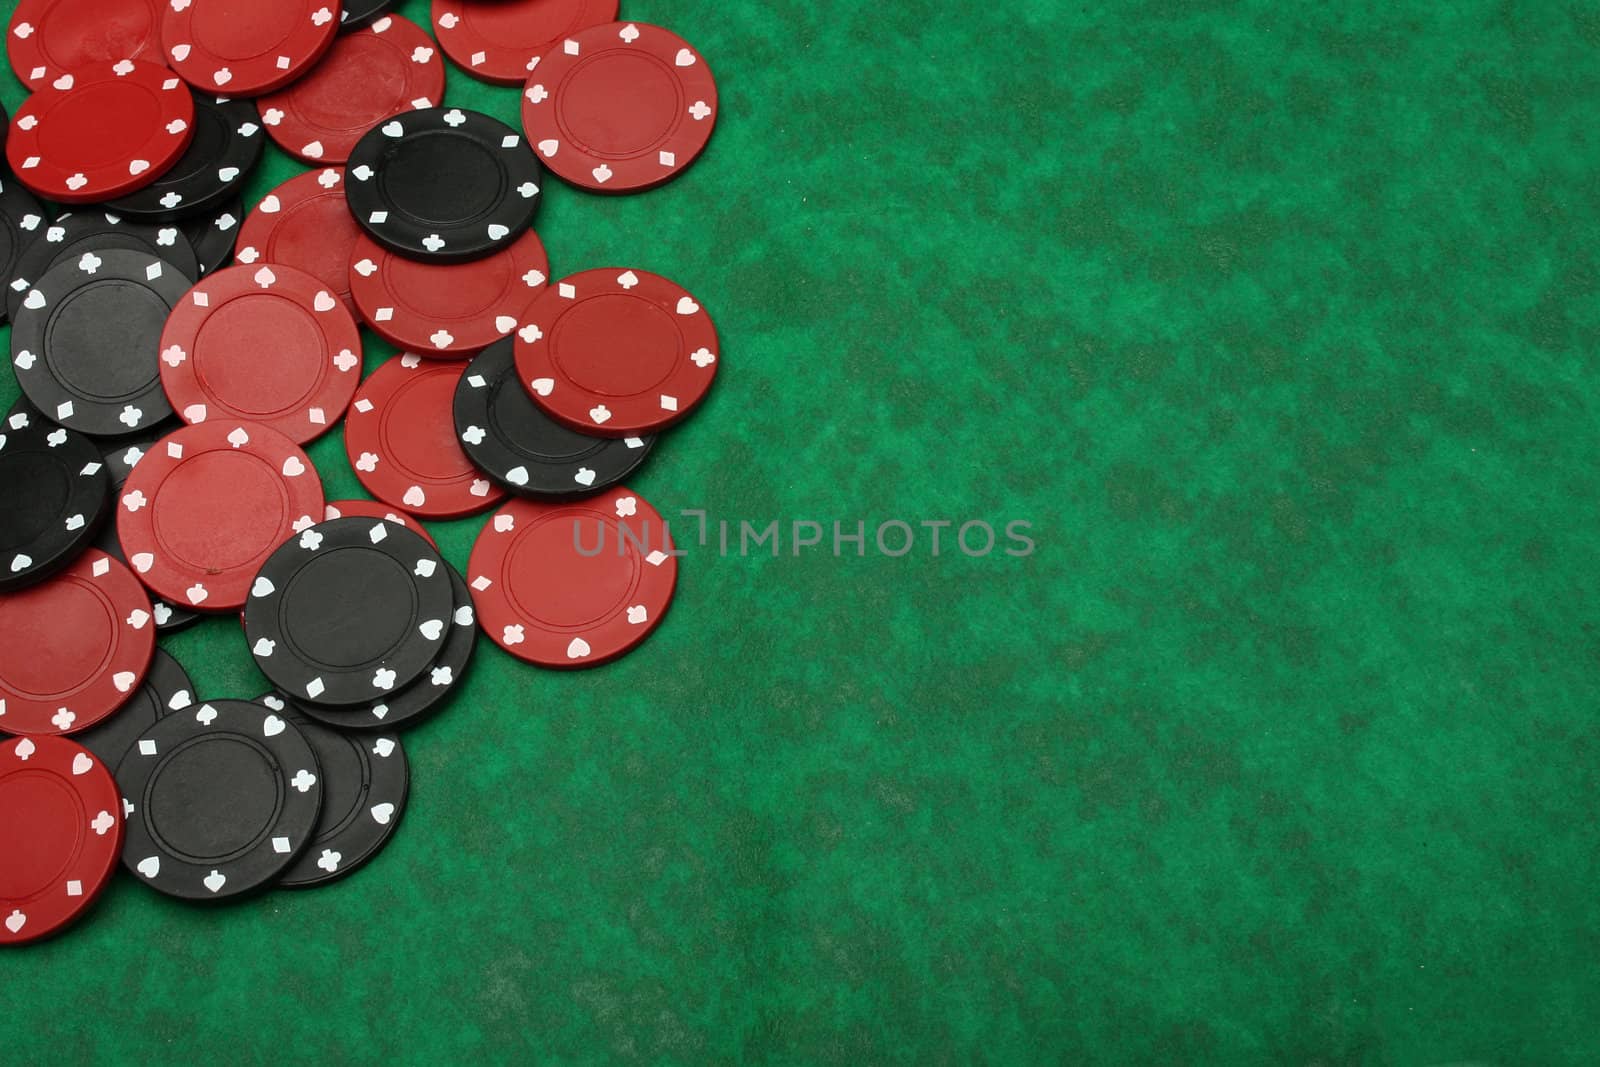 Gambling chips over green felt with copy space. I�ve got more poker images